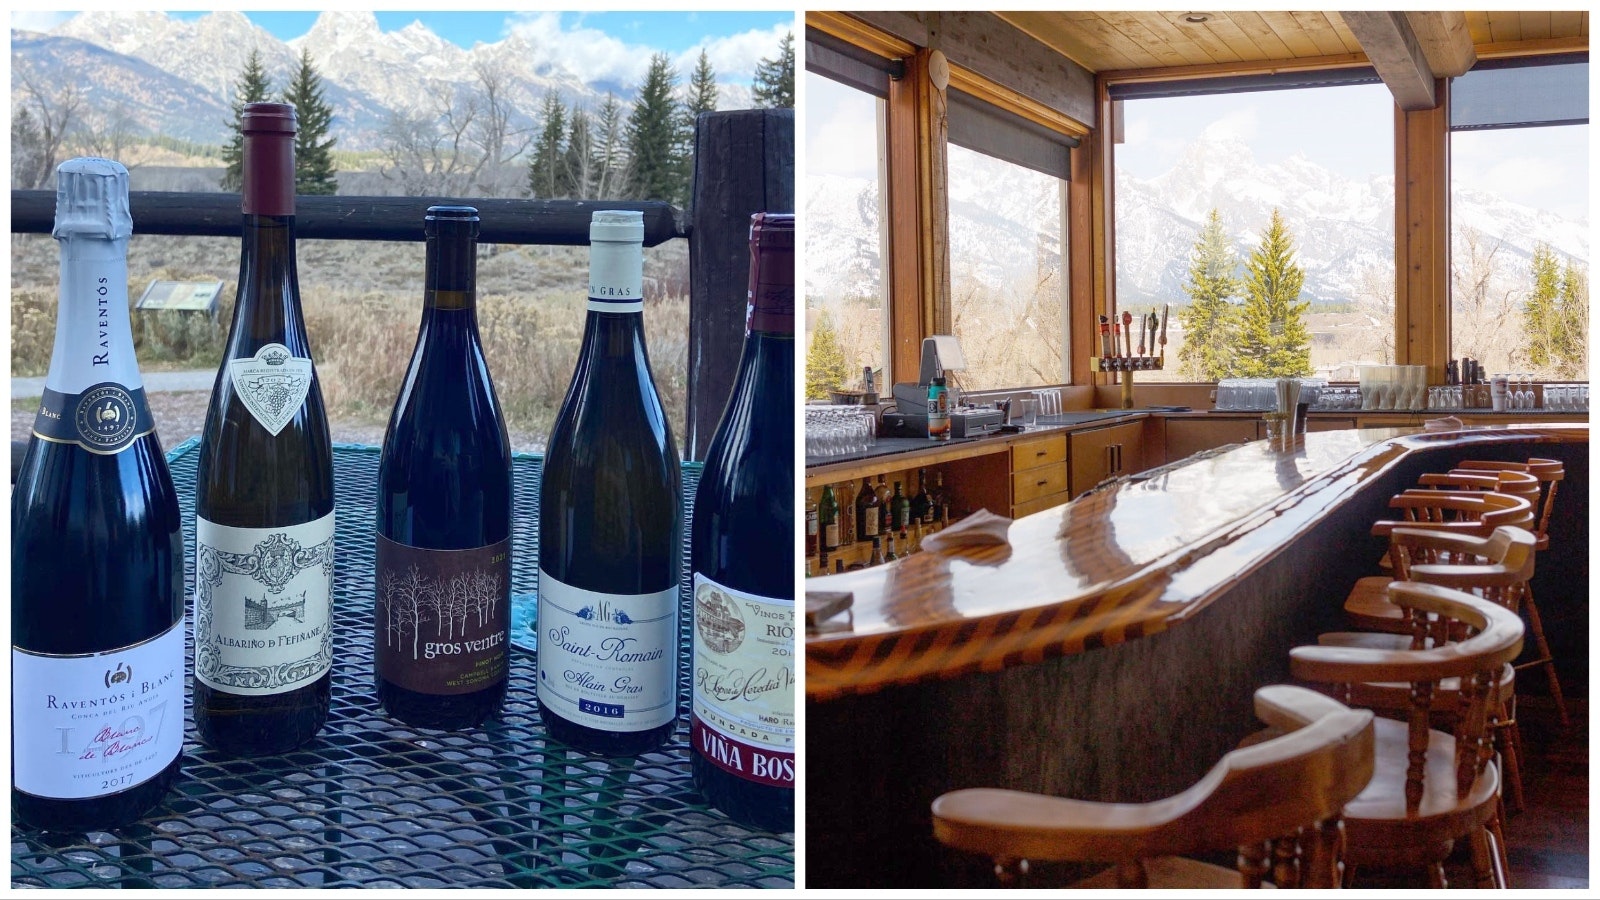 Dornan's has developed a reputation for having a top-flight wine selection, and you can't beat the views from the bar.